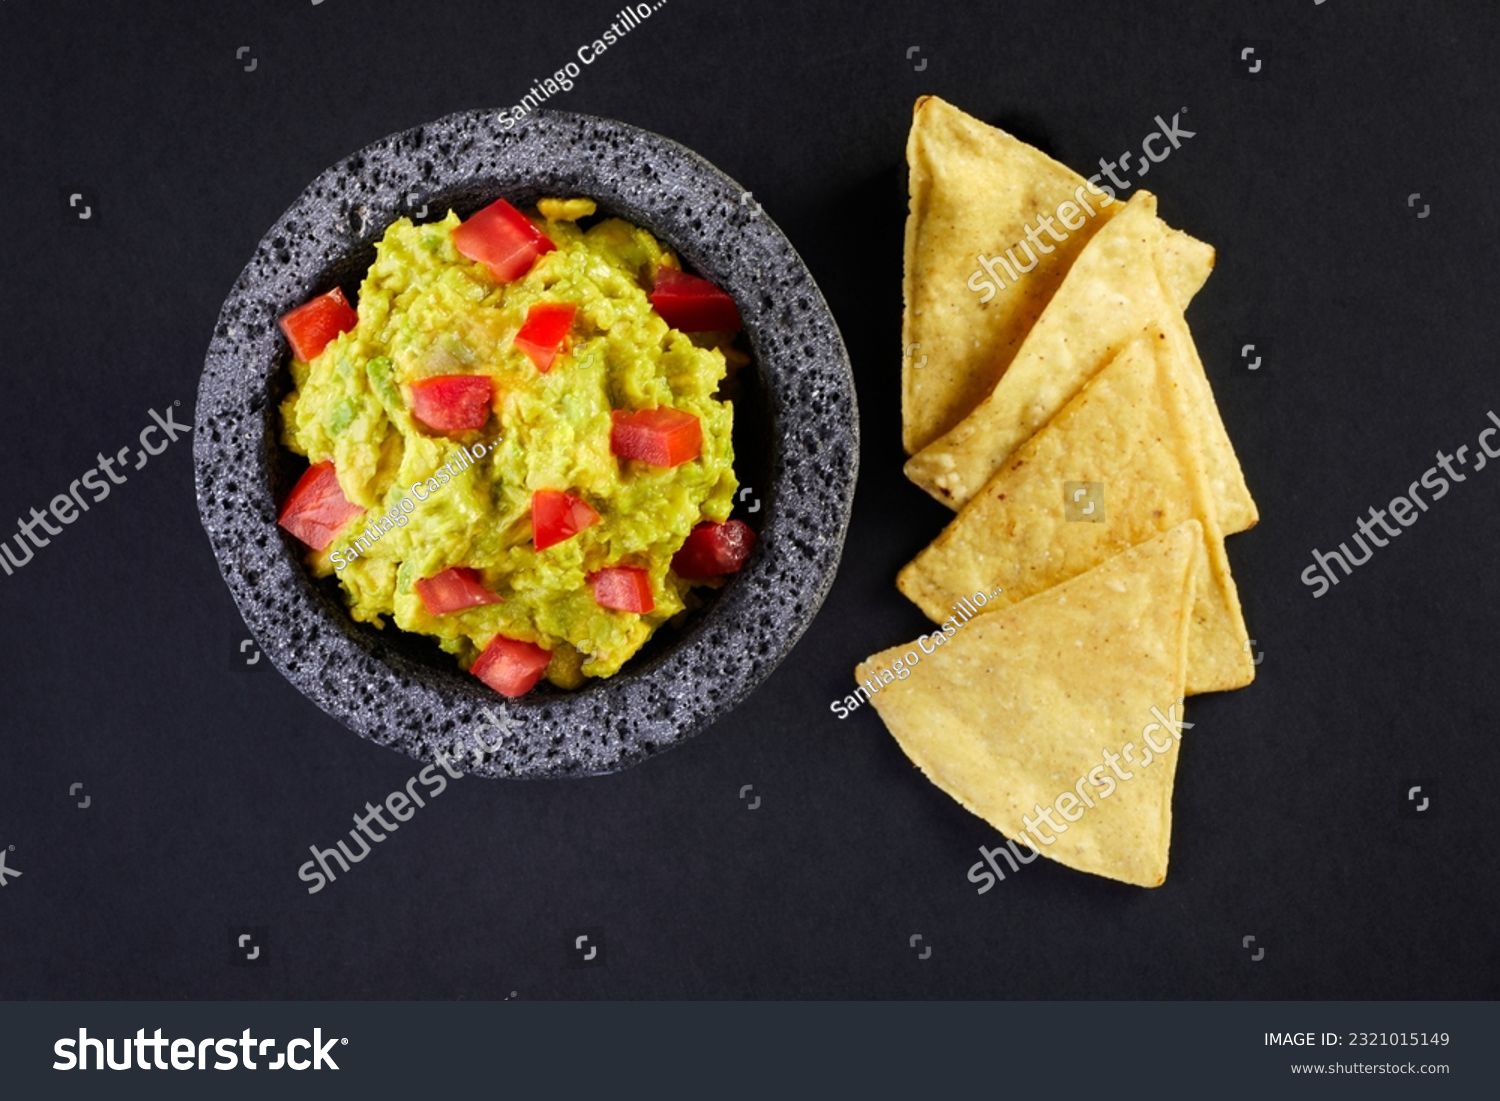 Top view of a delicious avocado guacamole with red diced tomatoes in a typical stone Mexican mortar or molcajete by a few totopos or nachos over a black background. #2321015149